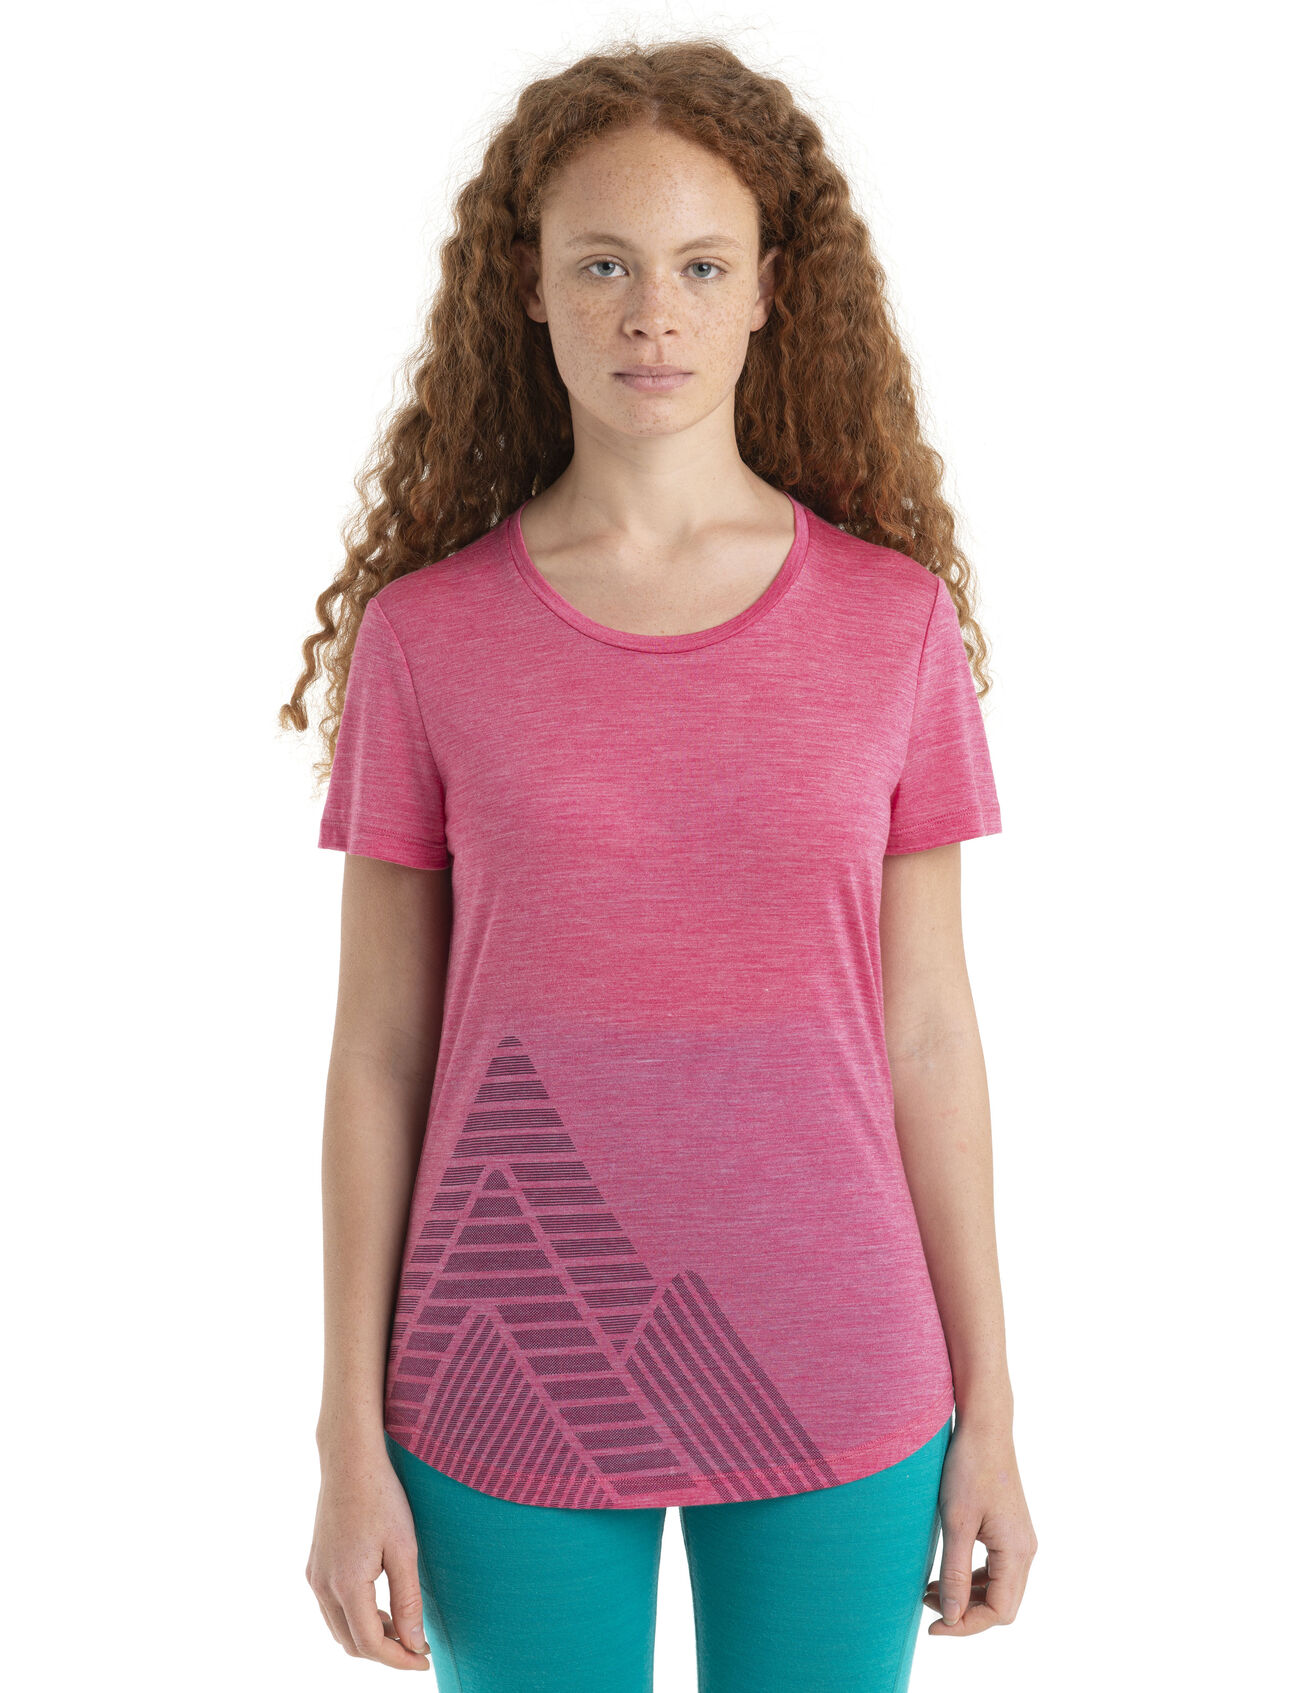 Womens 125 Cool-Lite™ Merino Sphere II Short Sleeve T-Shirt Peak Quest A soft merino-blend tee made with our lightweight Cool-Lite™ jersey fabric, the 125 Cool-Lite™Sphere II Short Sleeve Tee Peak Quest provides natural breathability, odour resistance and comfort. The tee's original graphic print draws inspiration from taking on the challenge of the mountains, at any level.